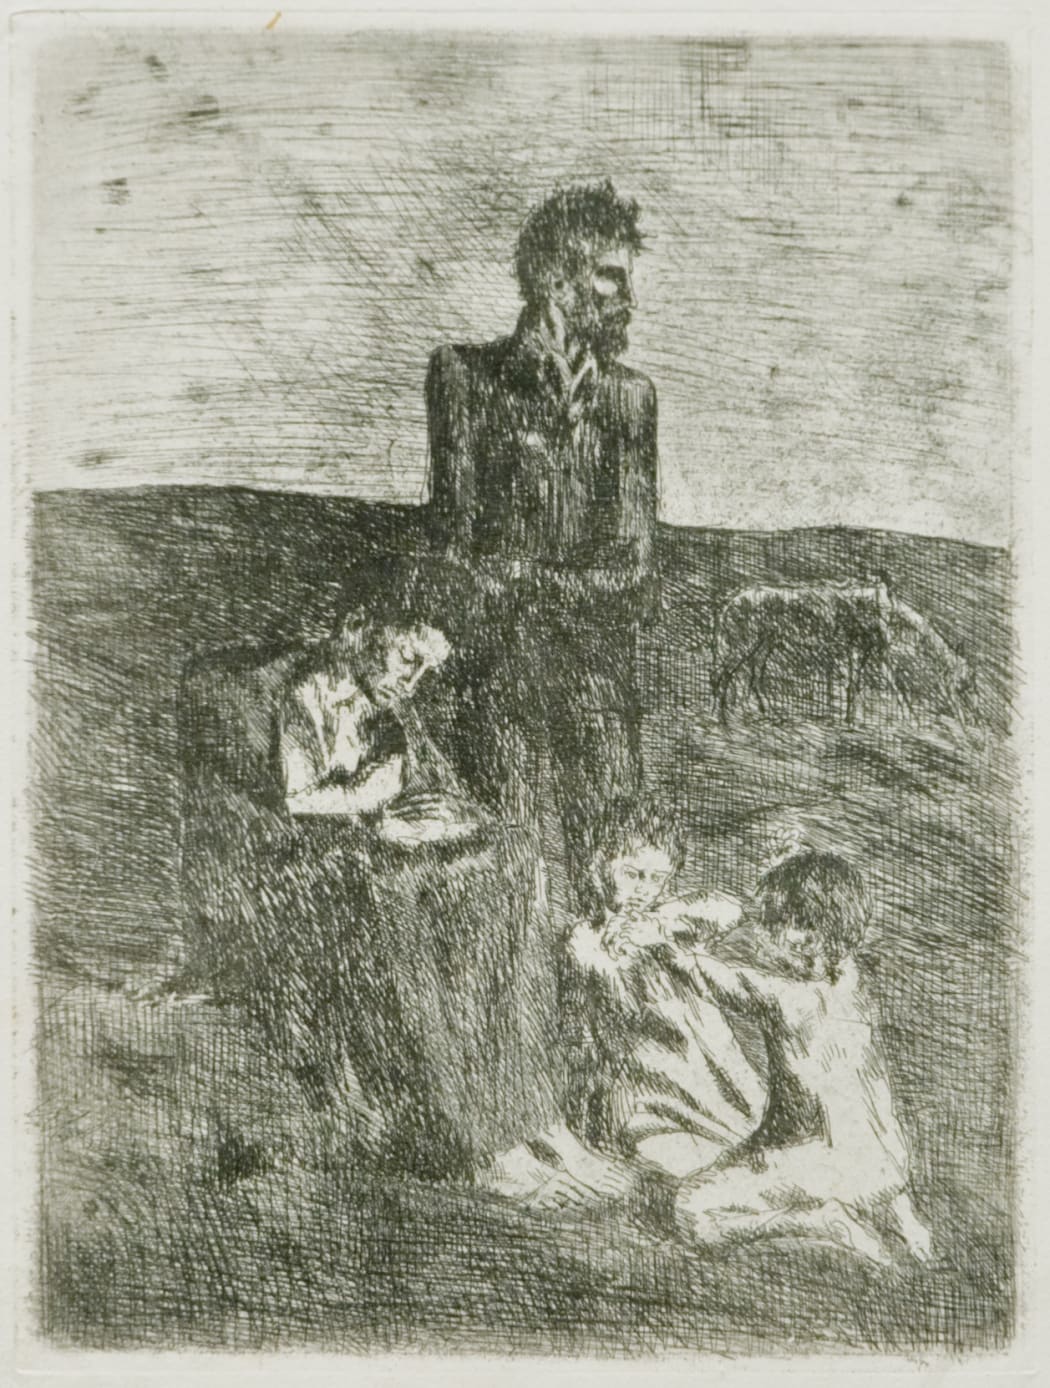 Les Pauvres (Bloch 3), 1905, Etching, 9 1/4 x 7 inches